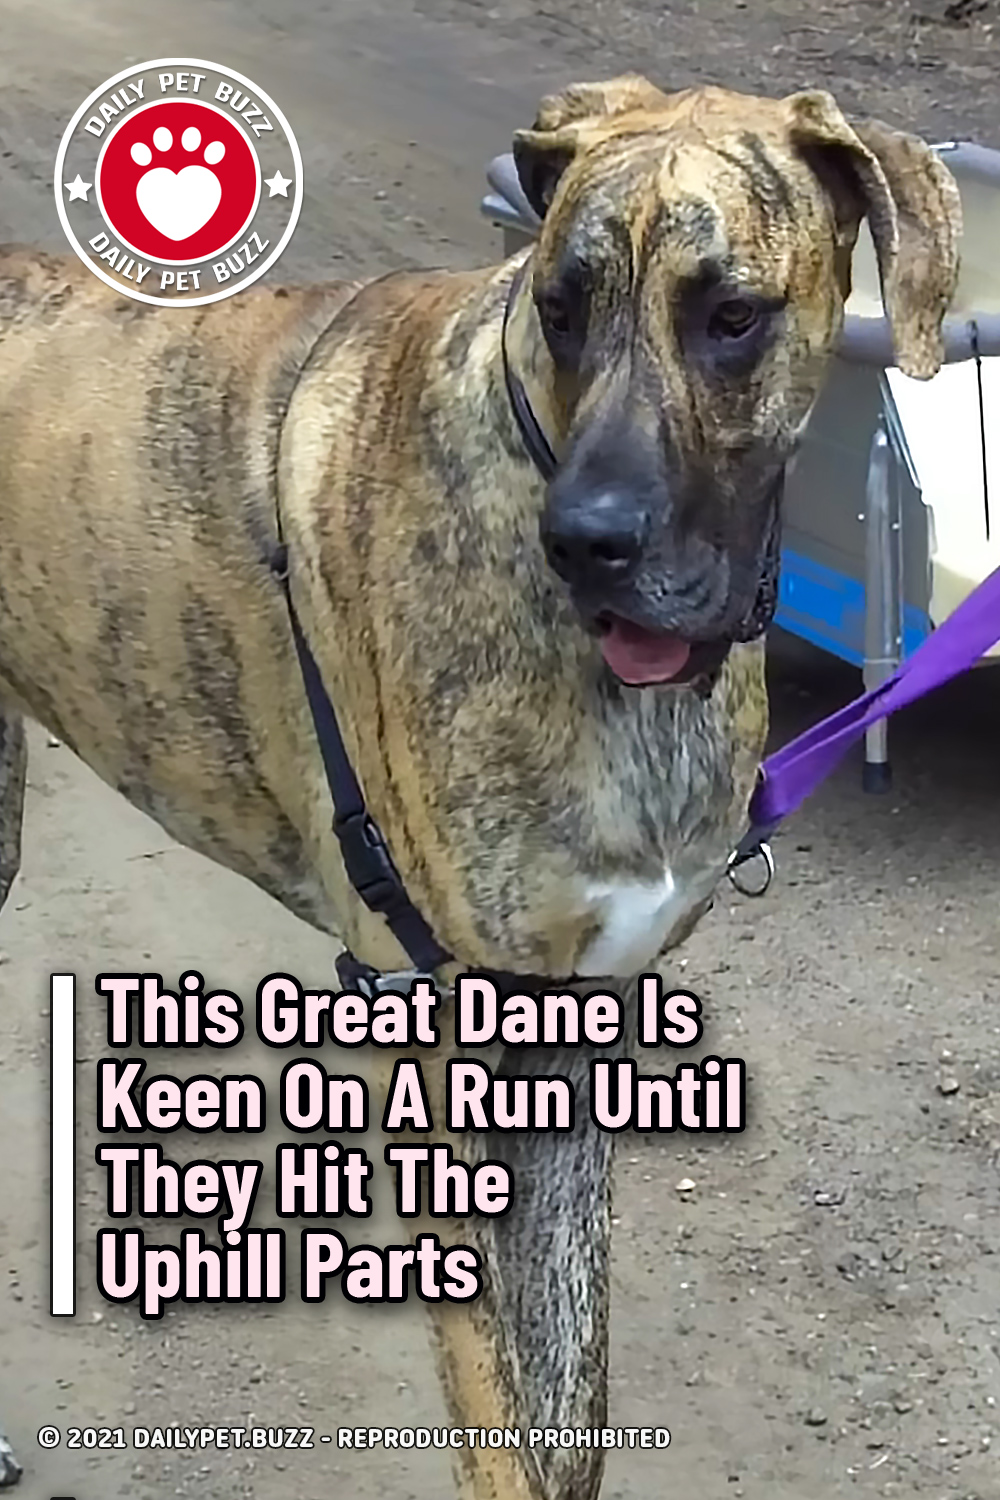 This Great Dane Is Keen On A Run Until They Hit The Uphill Parts